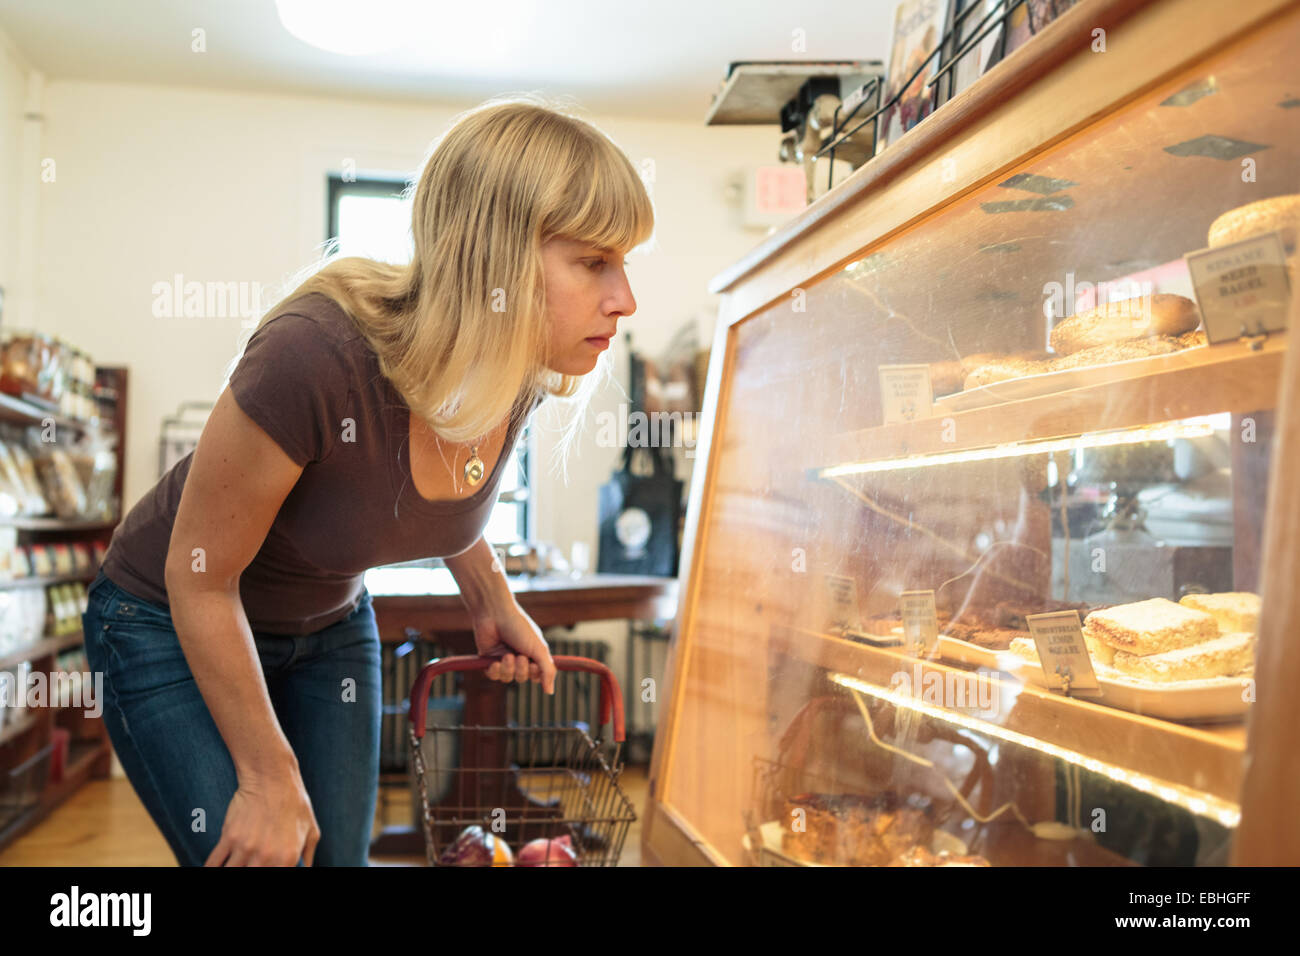 Female customer looking at display cabinet in country store Banque D'Images